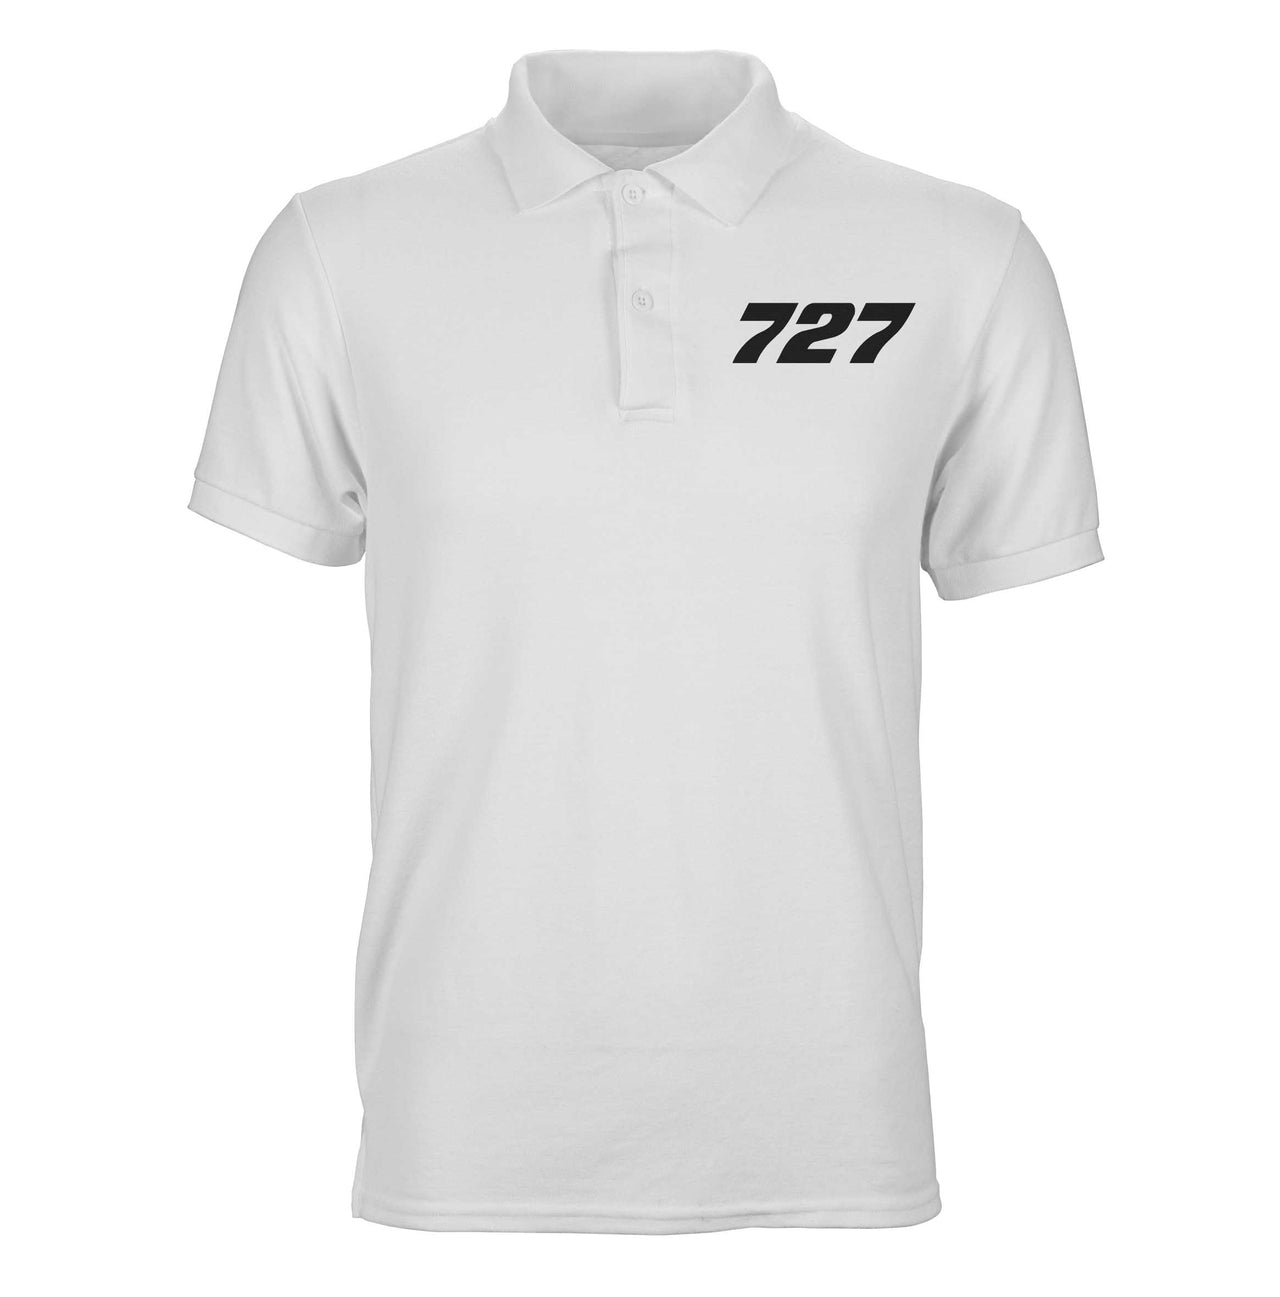 Boeing 727 Flat Text Designed Polo T-Shirts